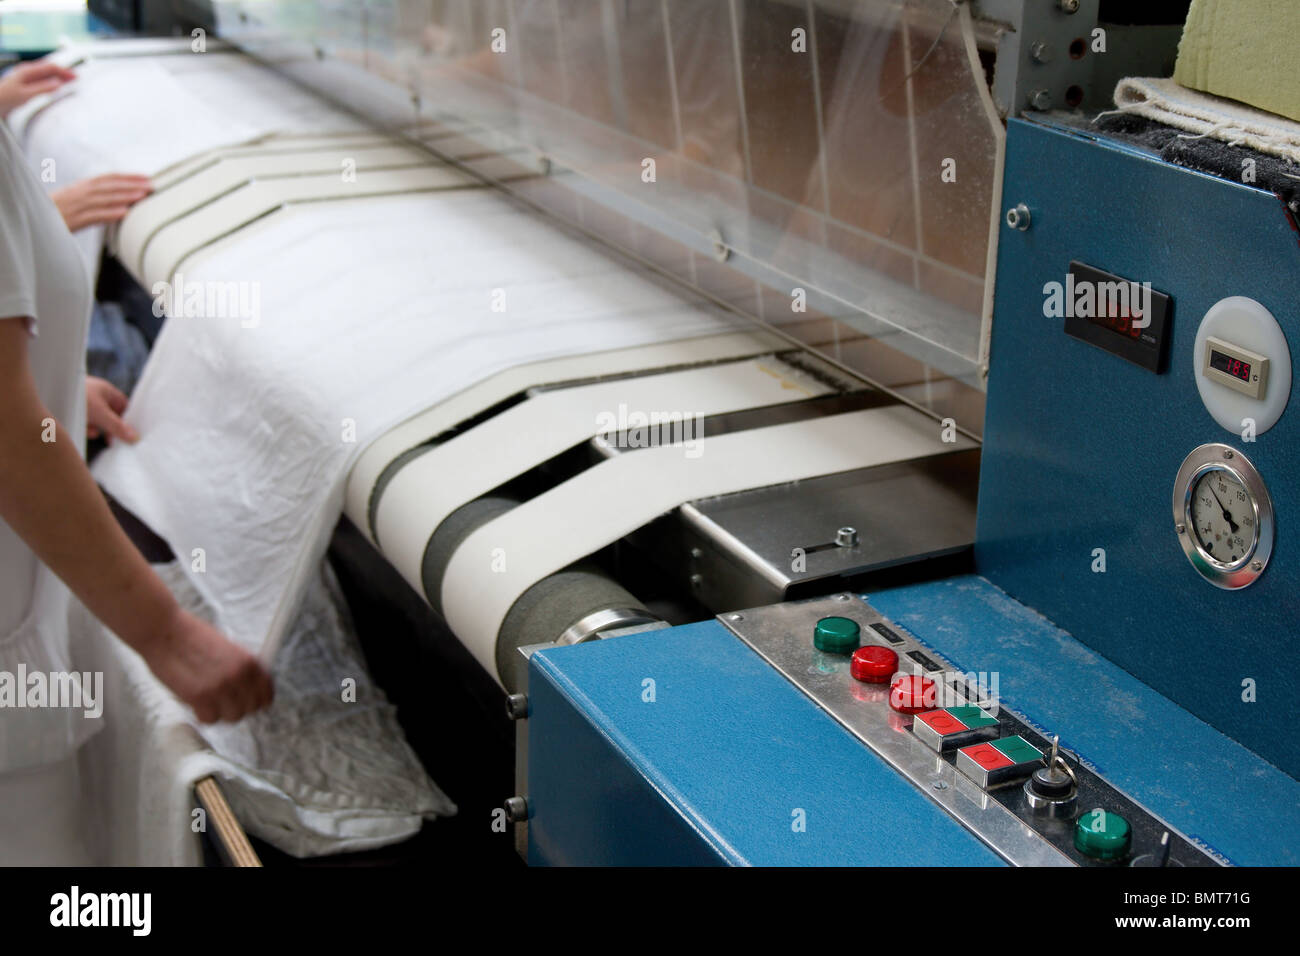 Automatic drying and ironing rolling press Stock Photo